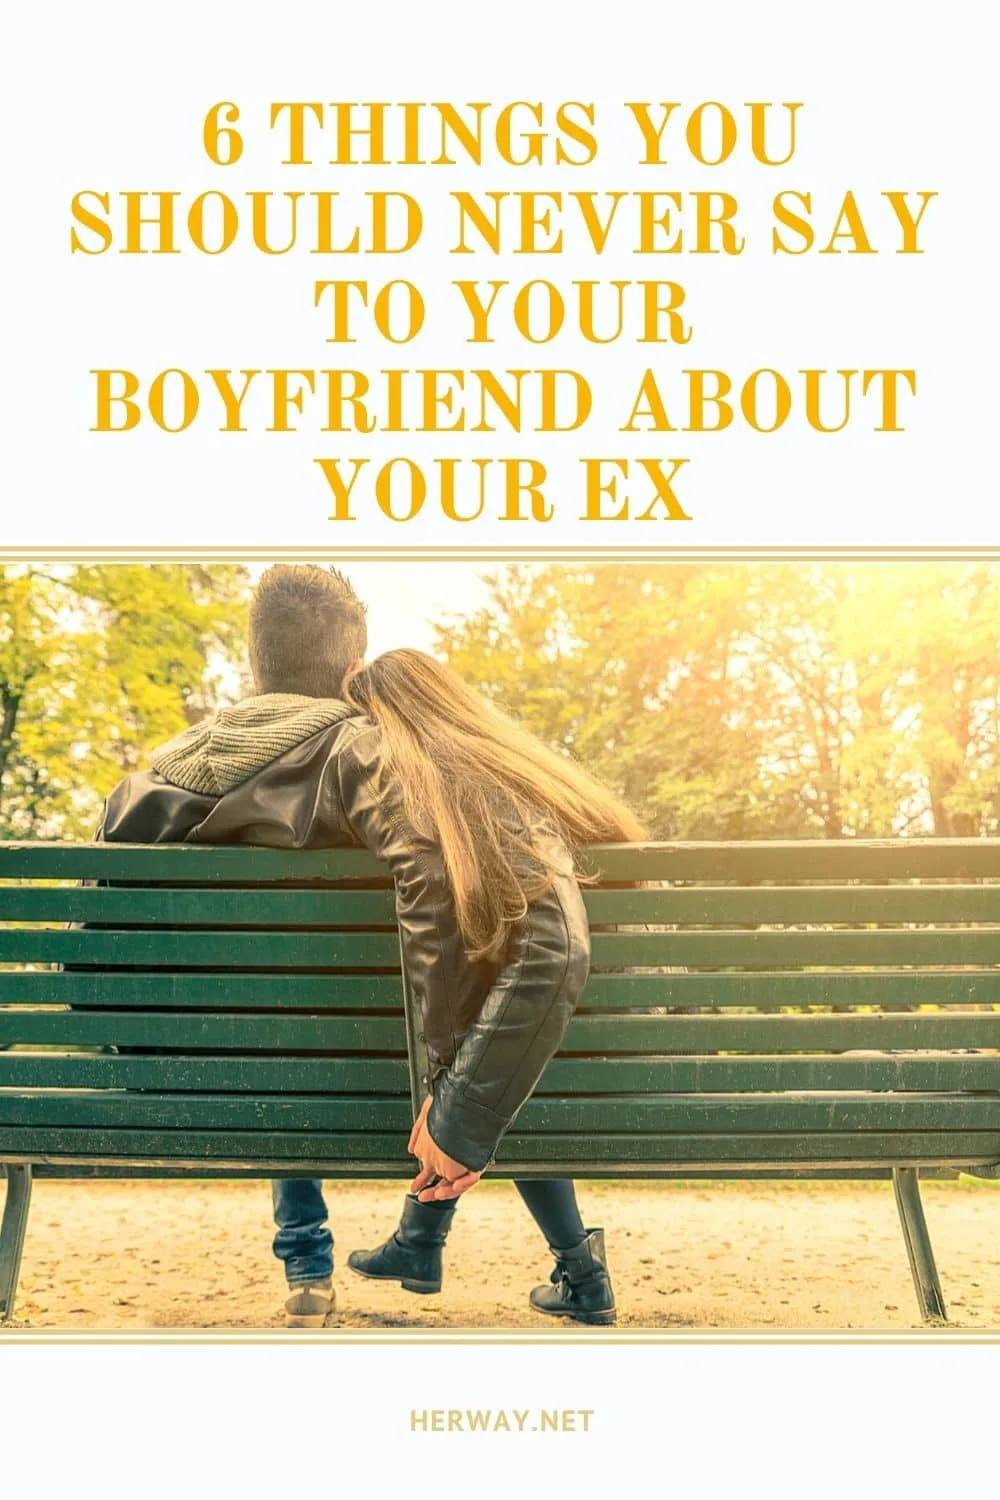 6 Things You Should Never Say To Your Boyfriend About Your Ex